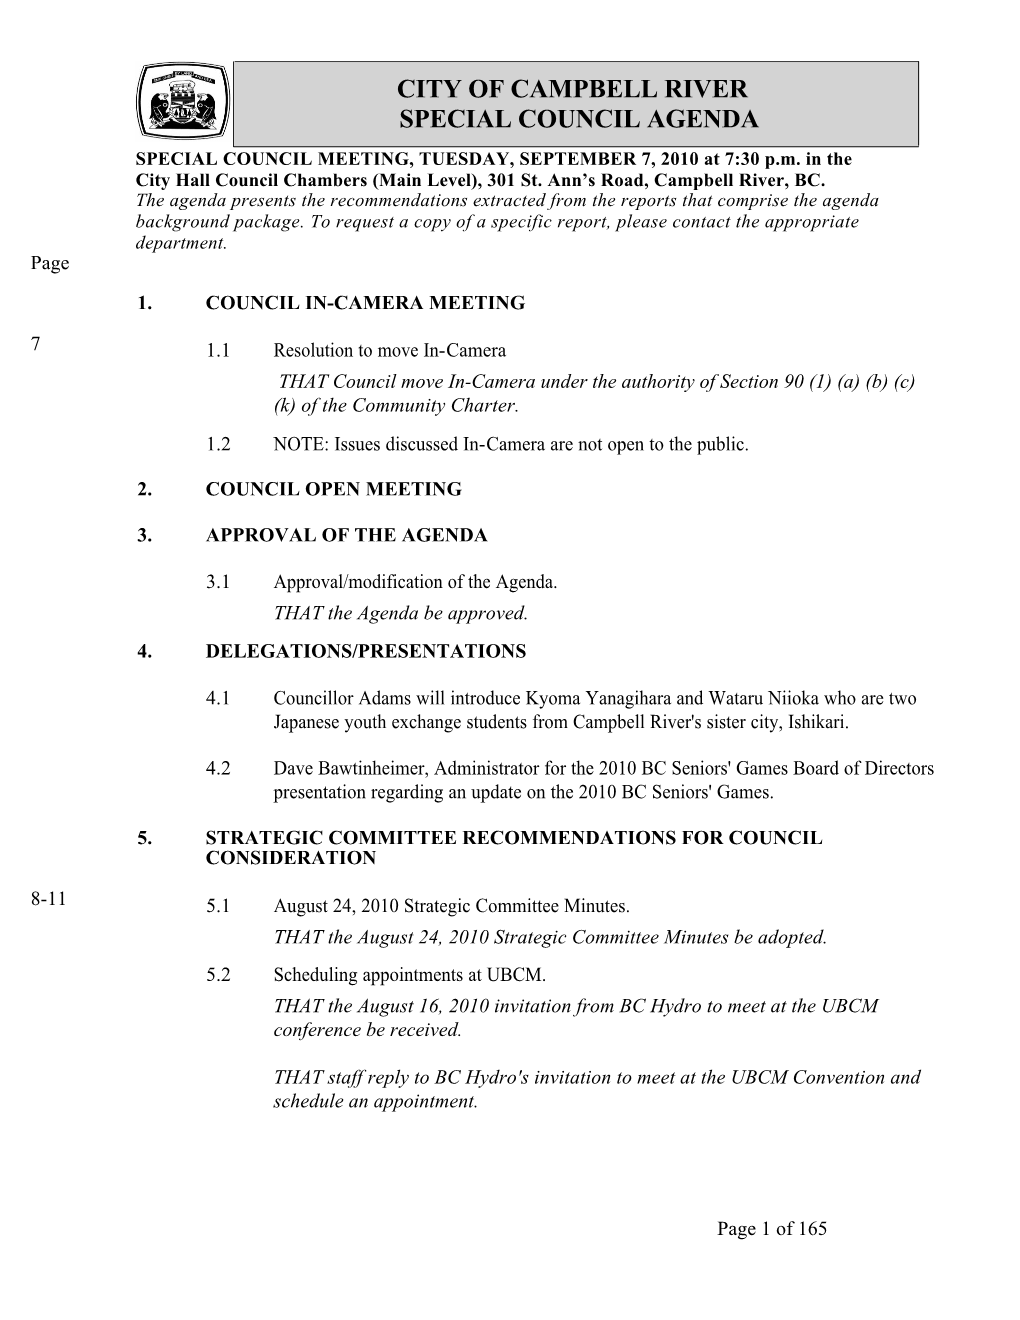 City of Campbell River Special Council Agenda